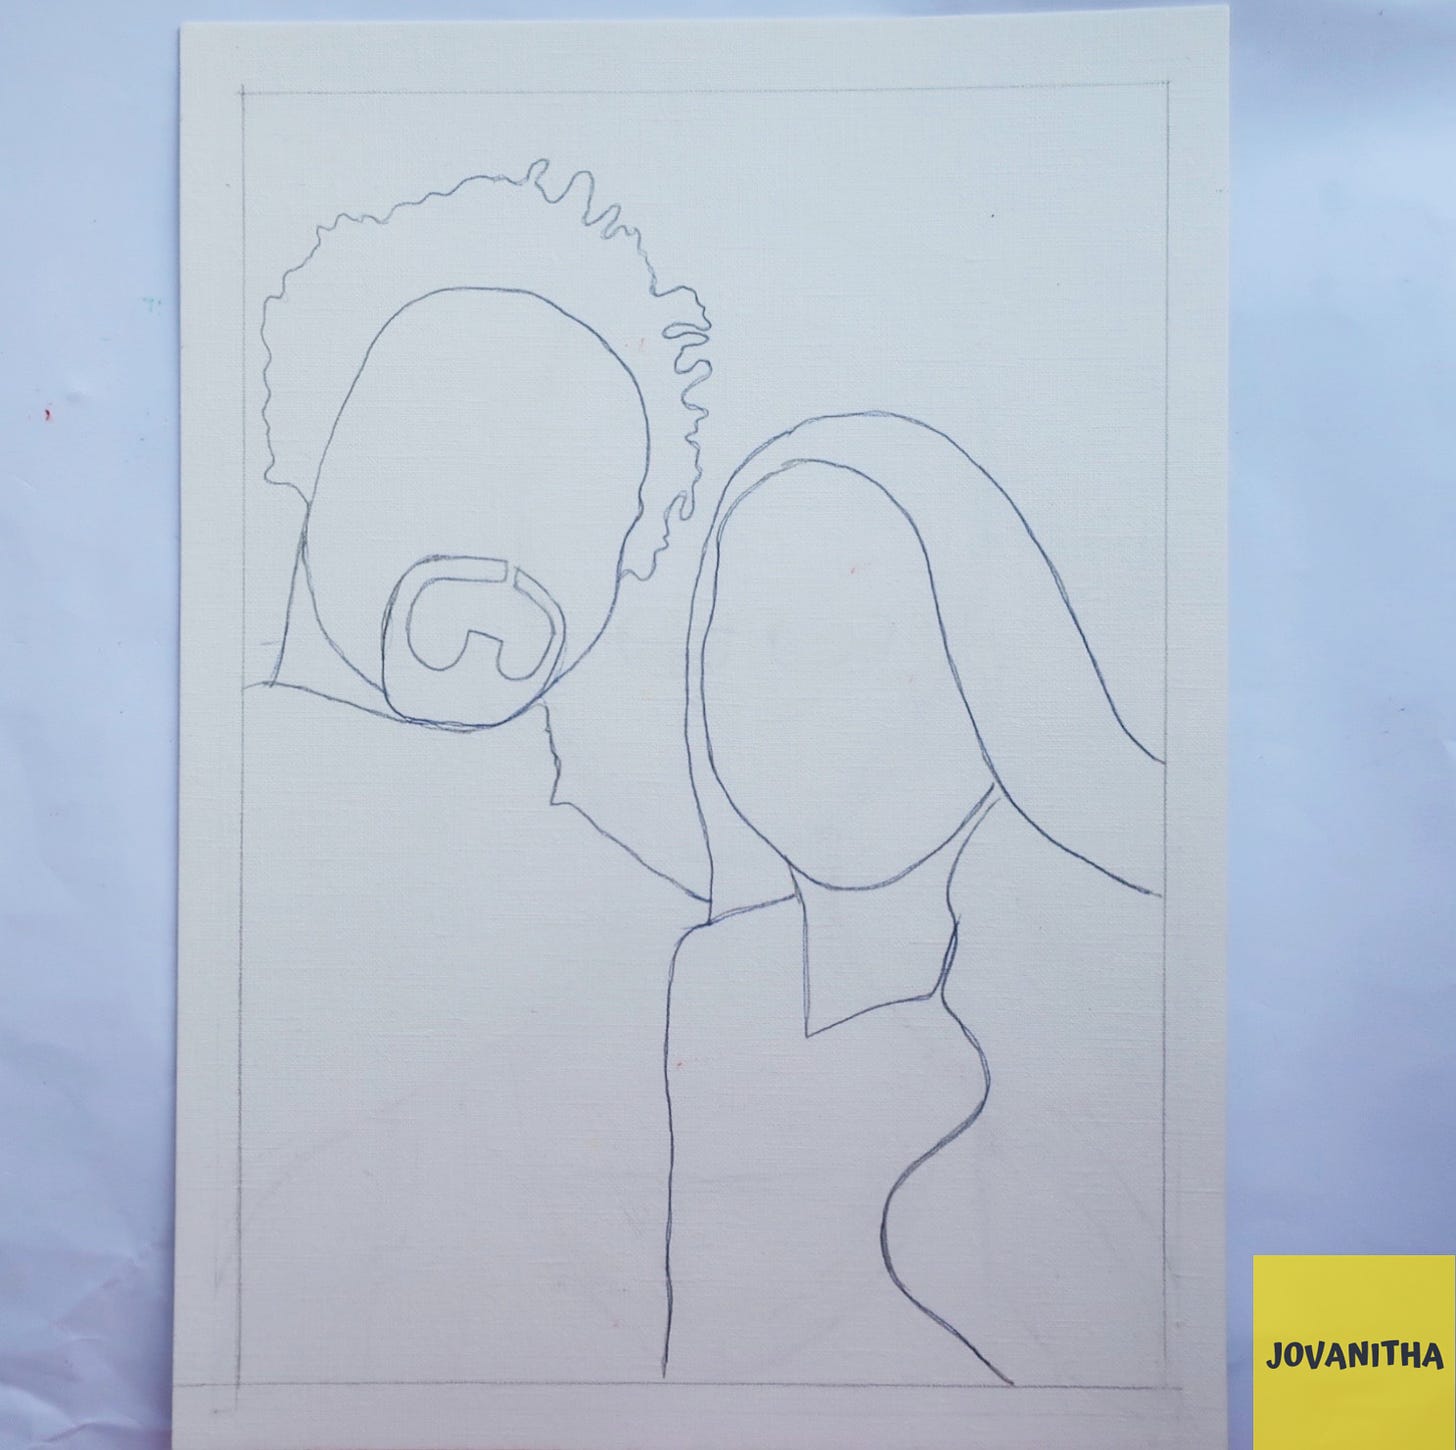 A drawing of two faceless portraits